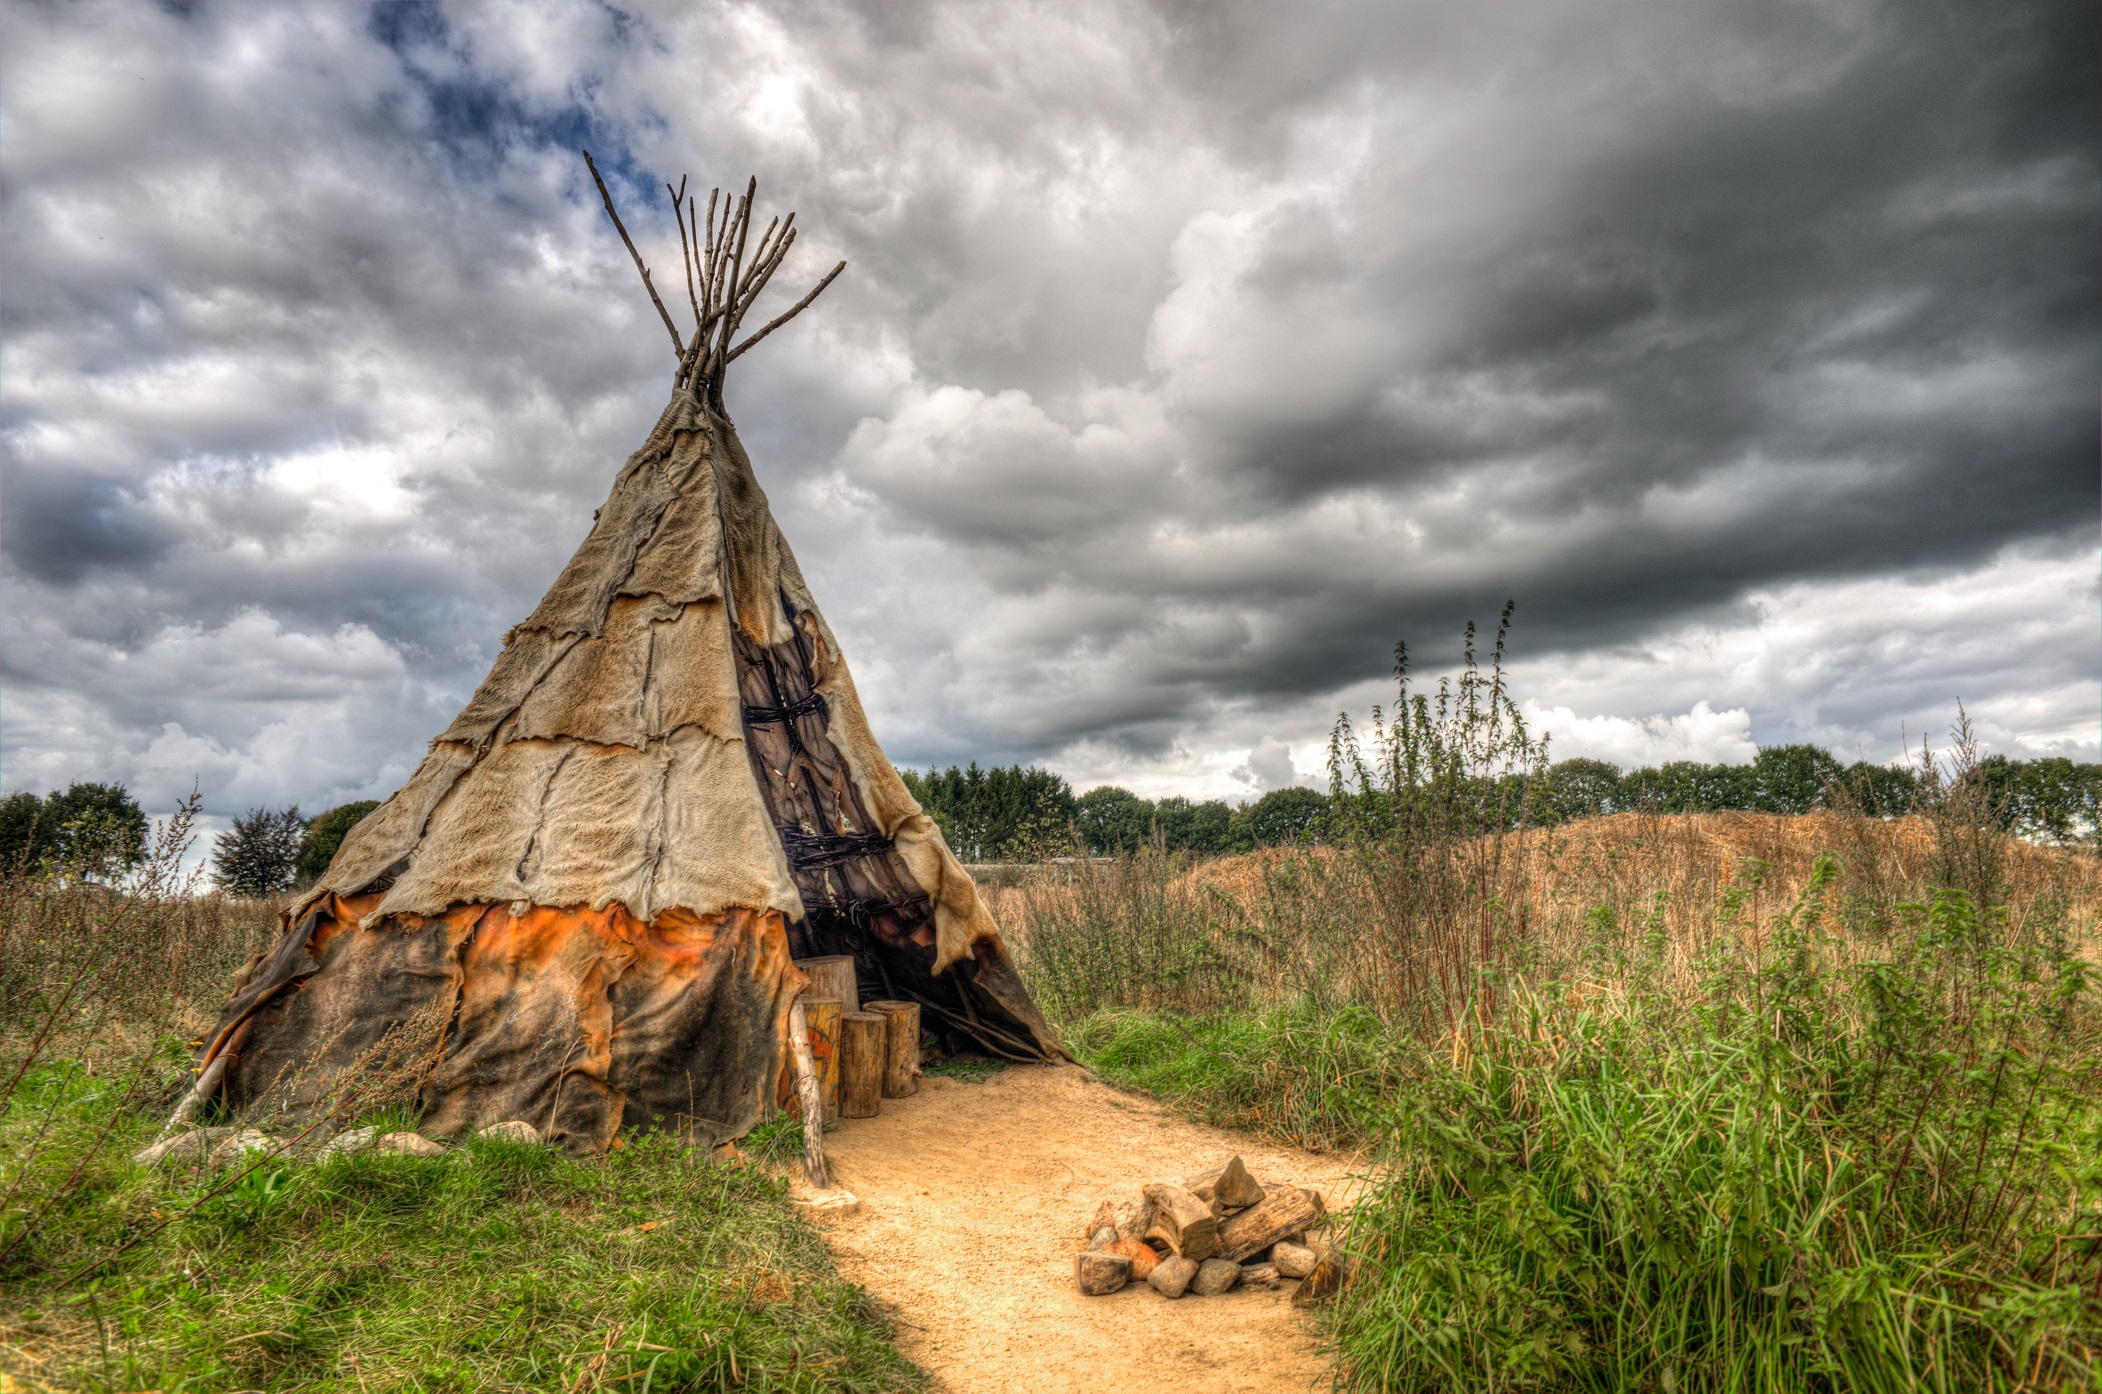 man made, tipi, cloud, hdr, native american, tent